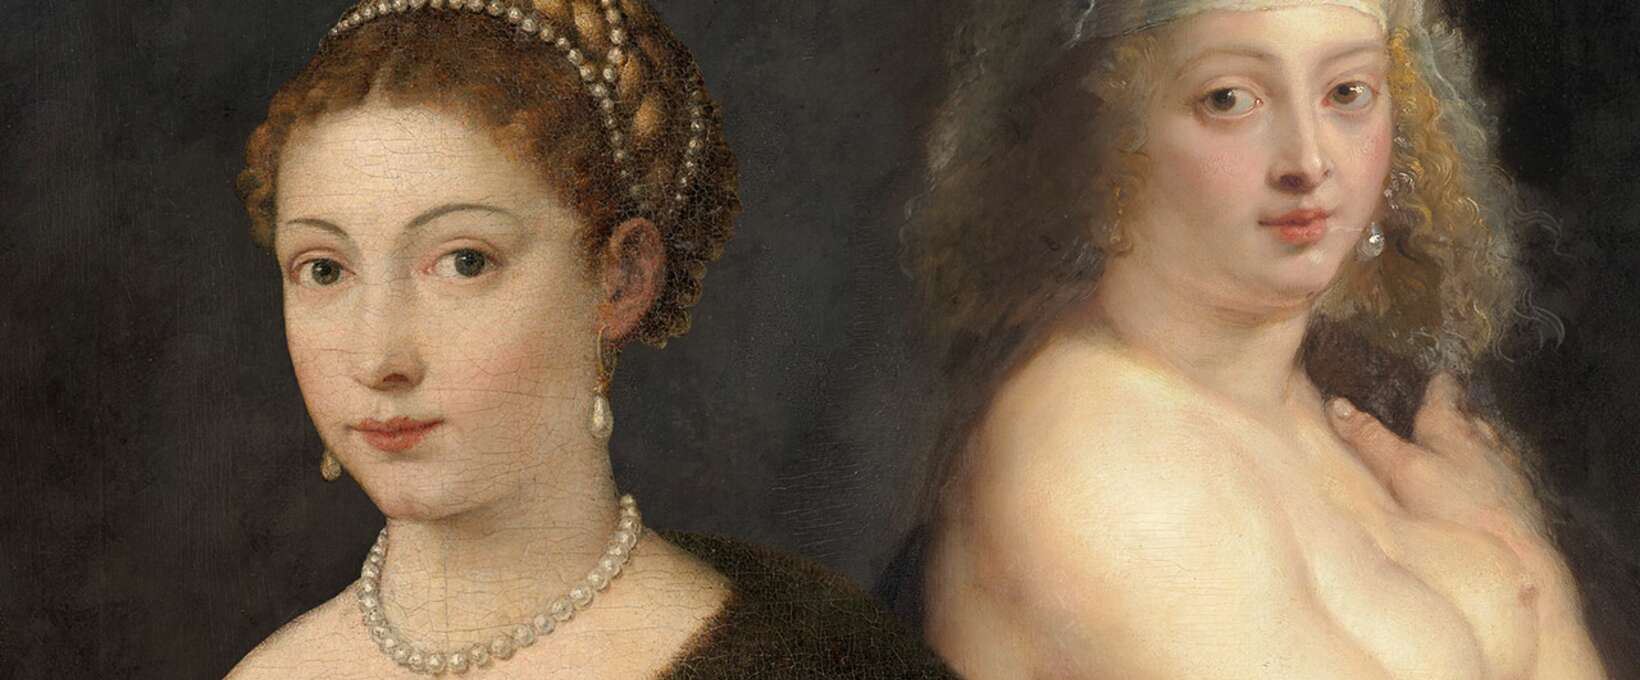 Comparison of two paintings by Peter Paul Rubens and Tiziano Vecellio | © © KHM-Museumsverband